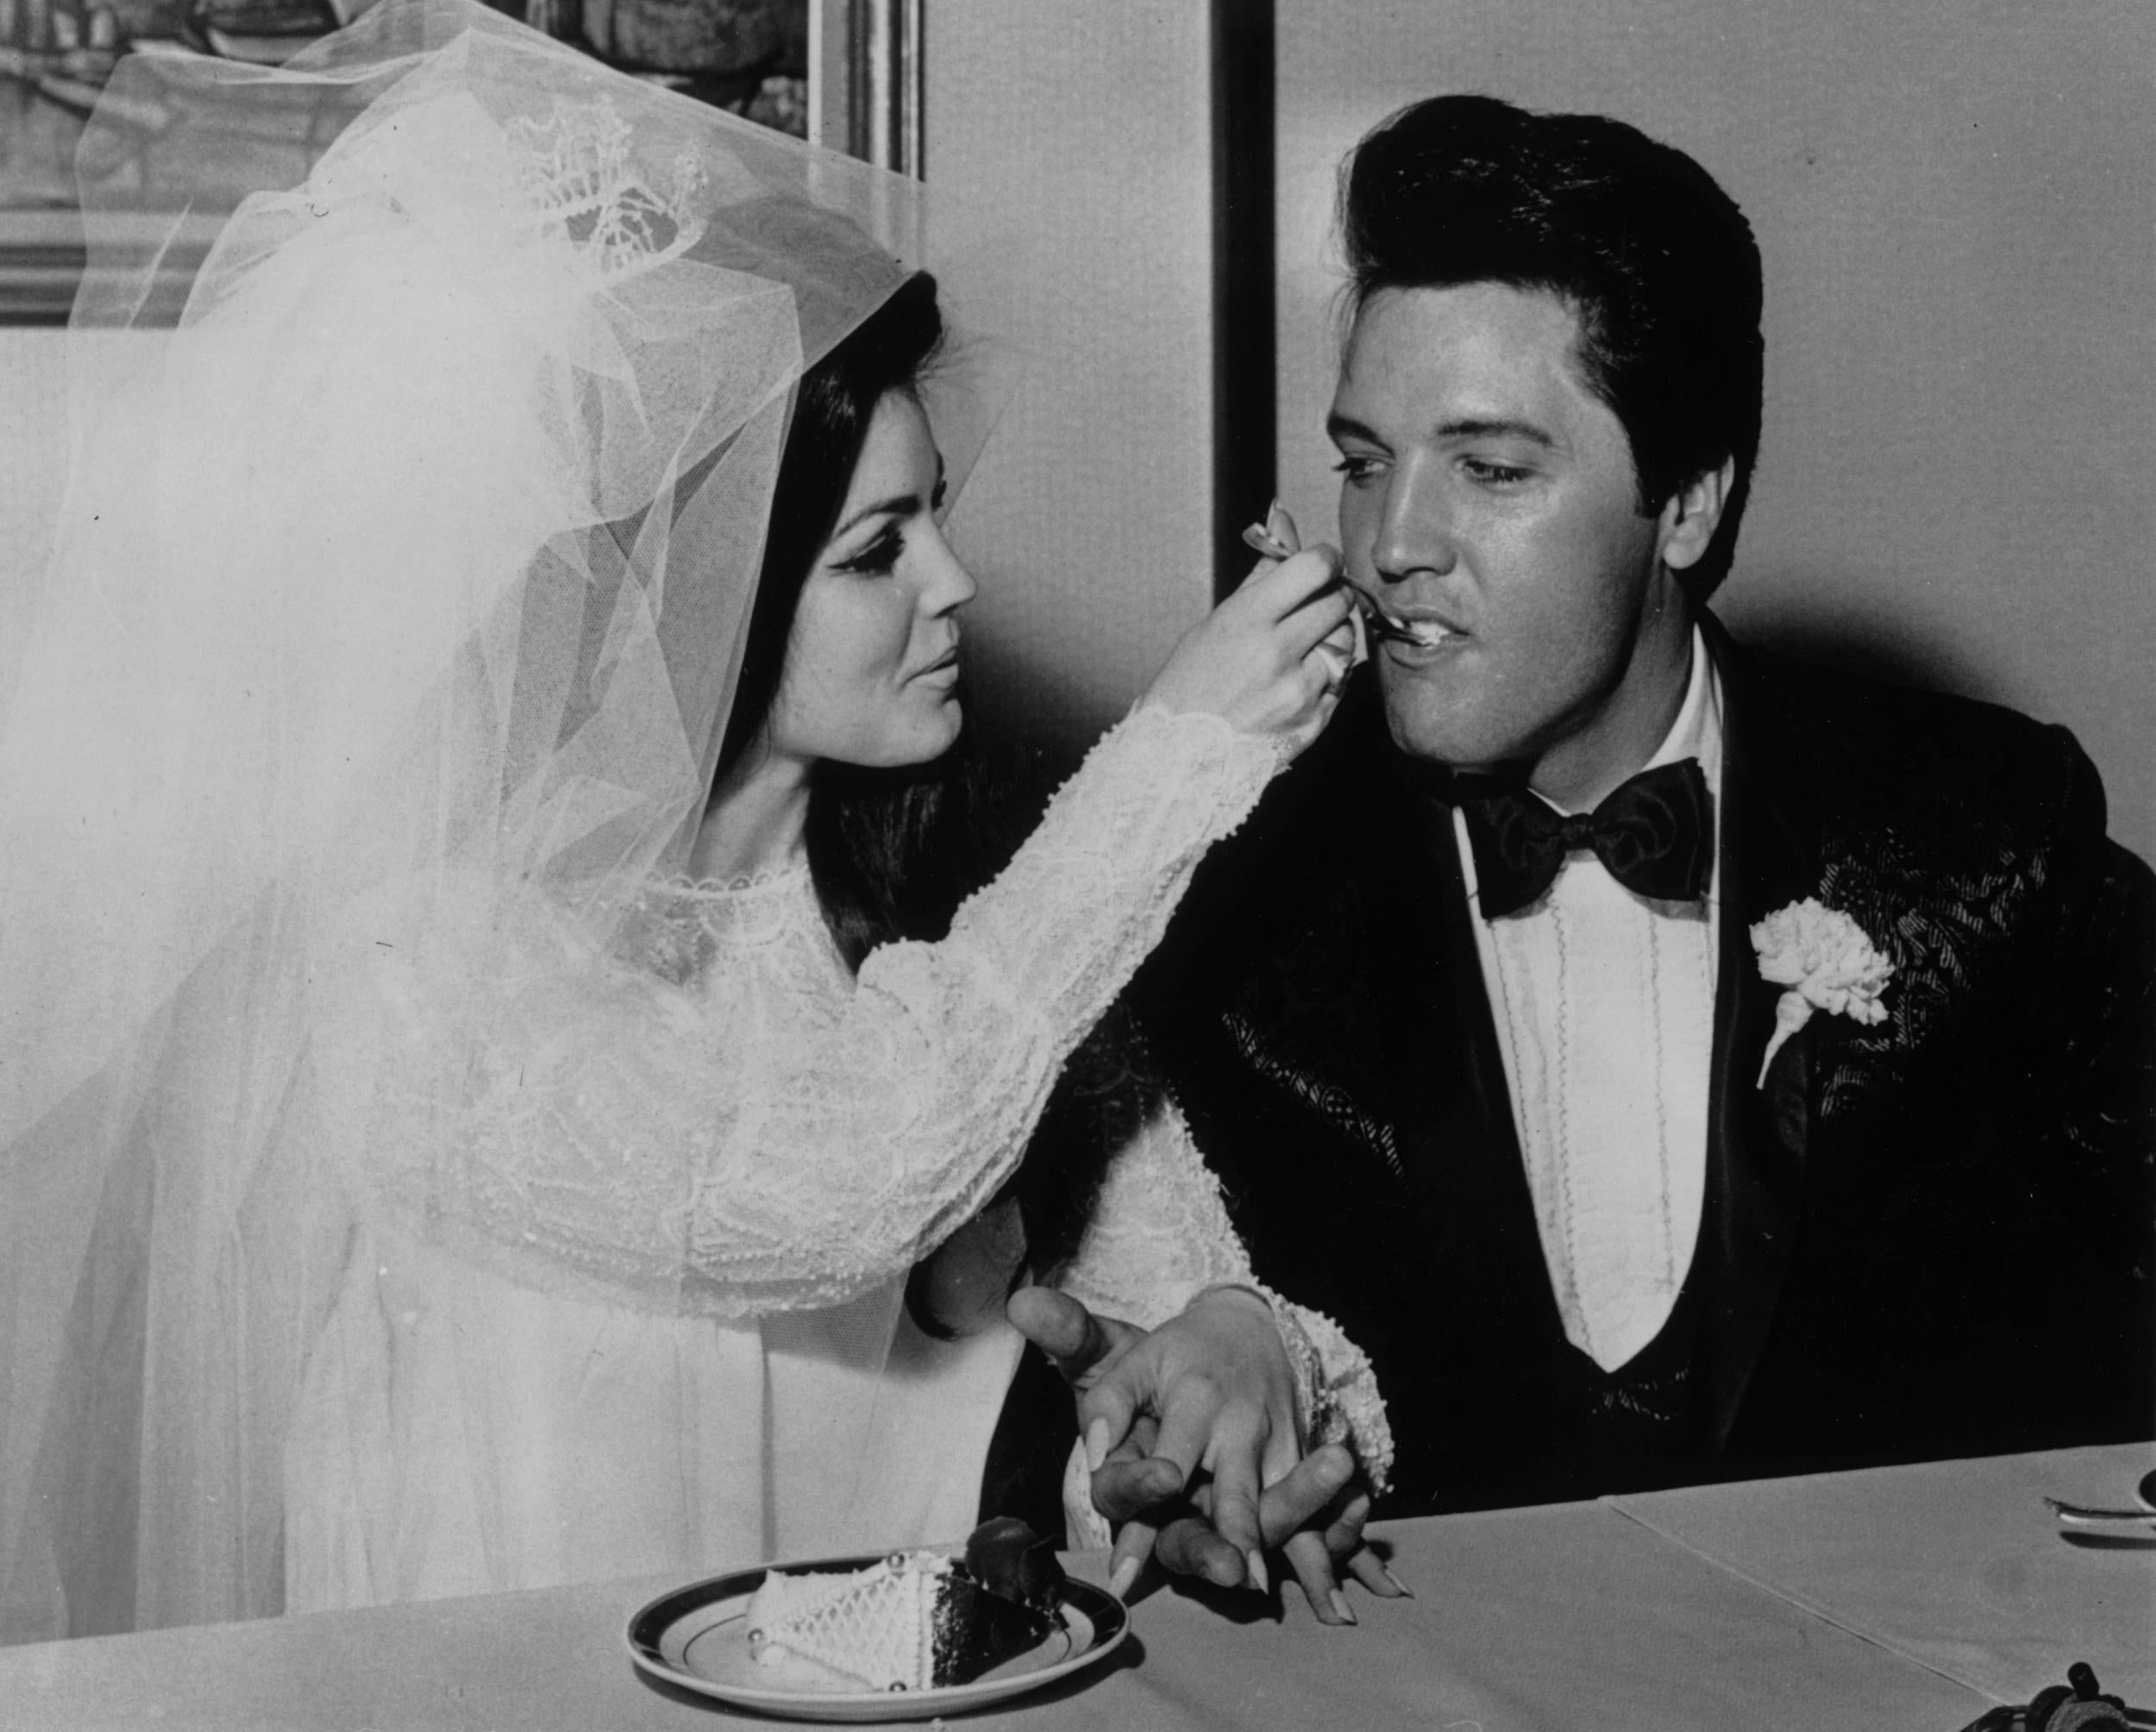 Elvis Presley being fed a mouthful of wedding cake by his bride Priscilla Beaulieu